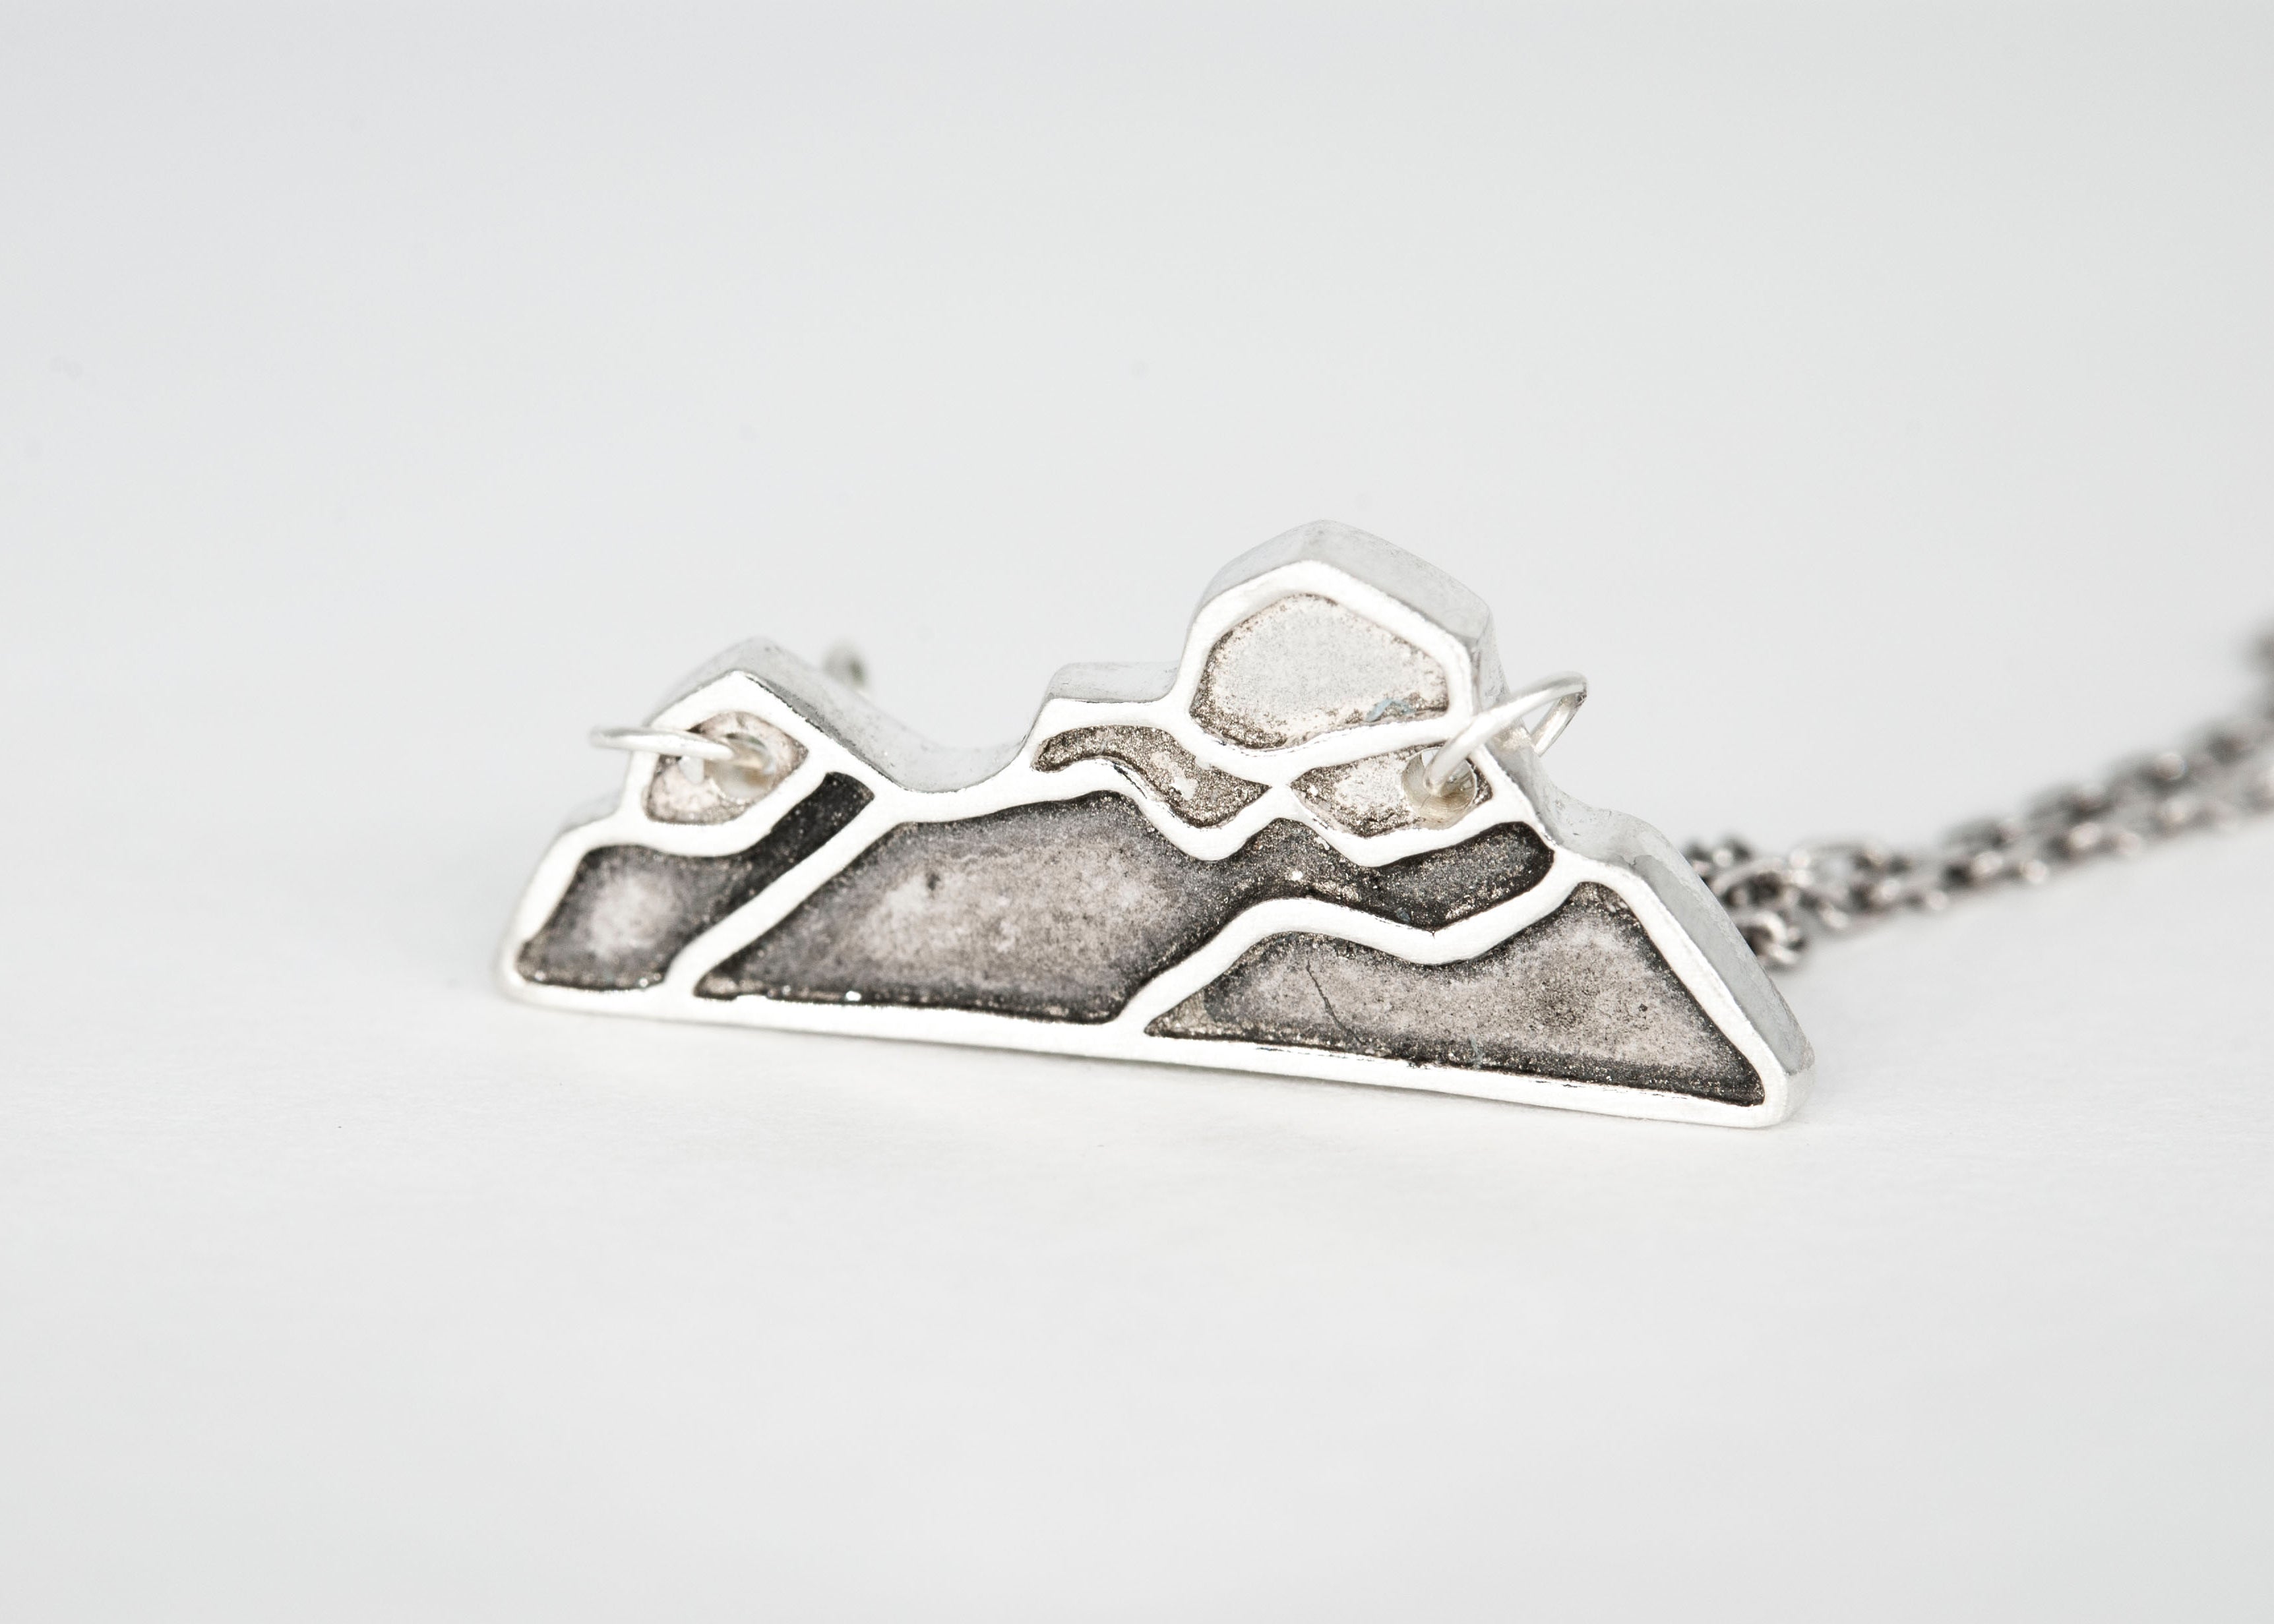 Crowsnest Mountain Necklace